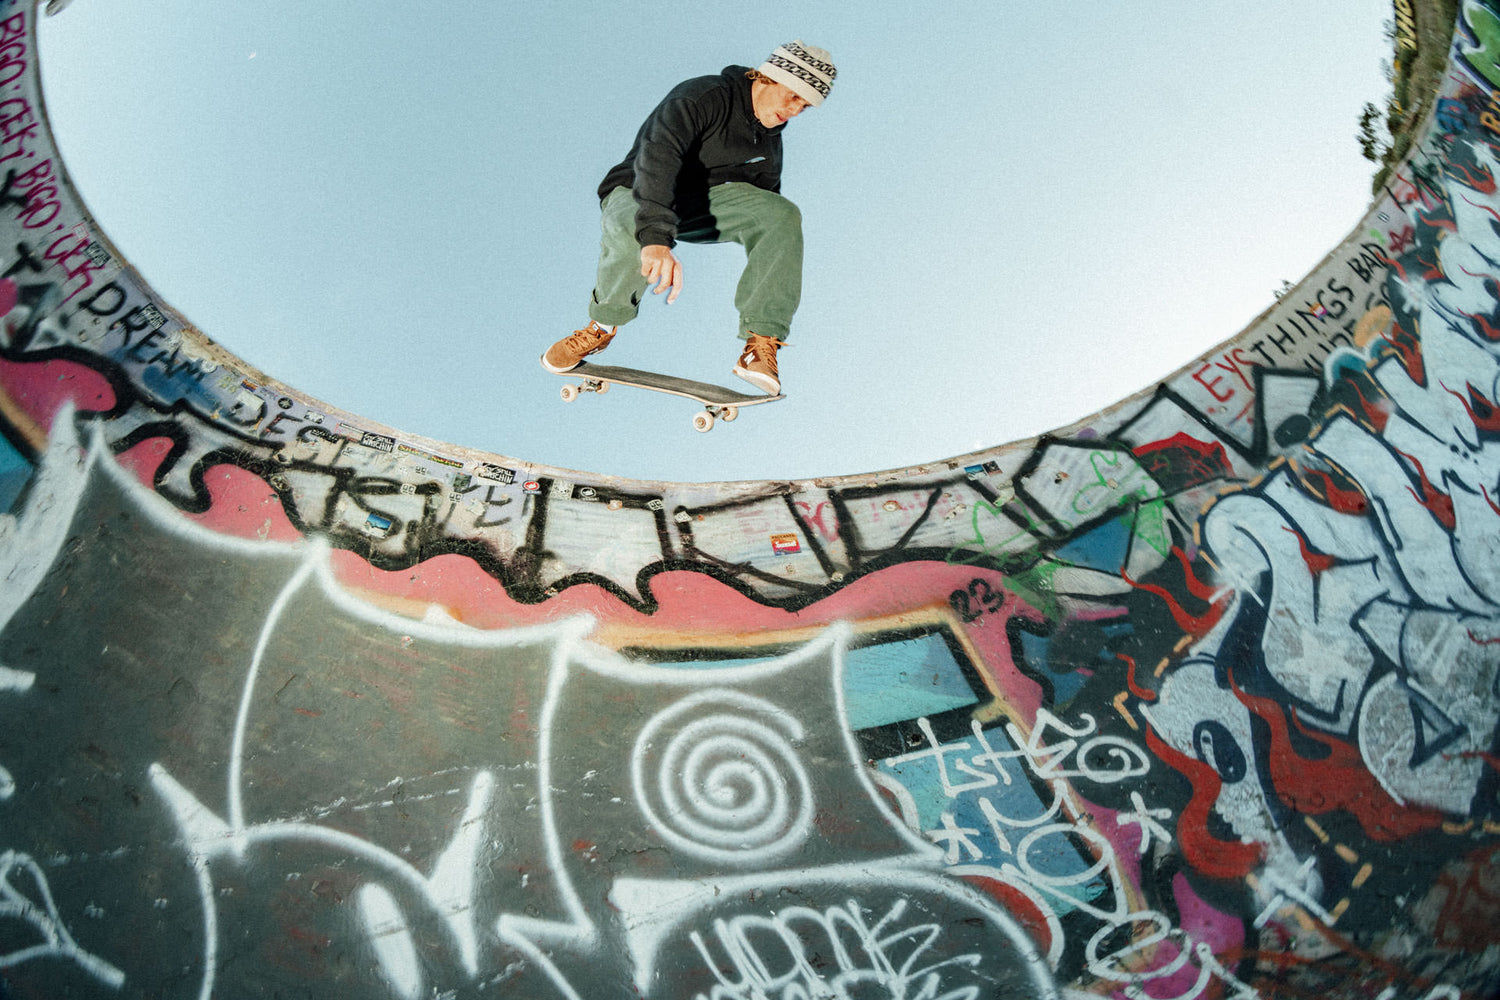 A skater riding above the coping in a graffiti covered pool.